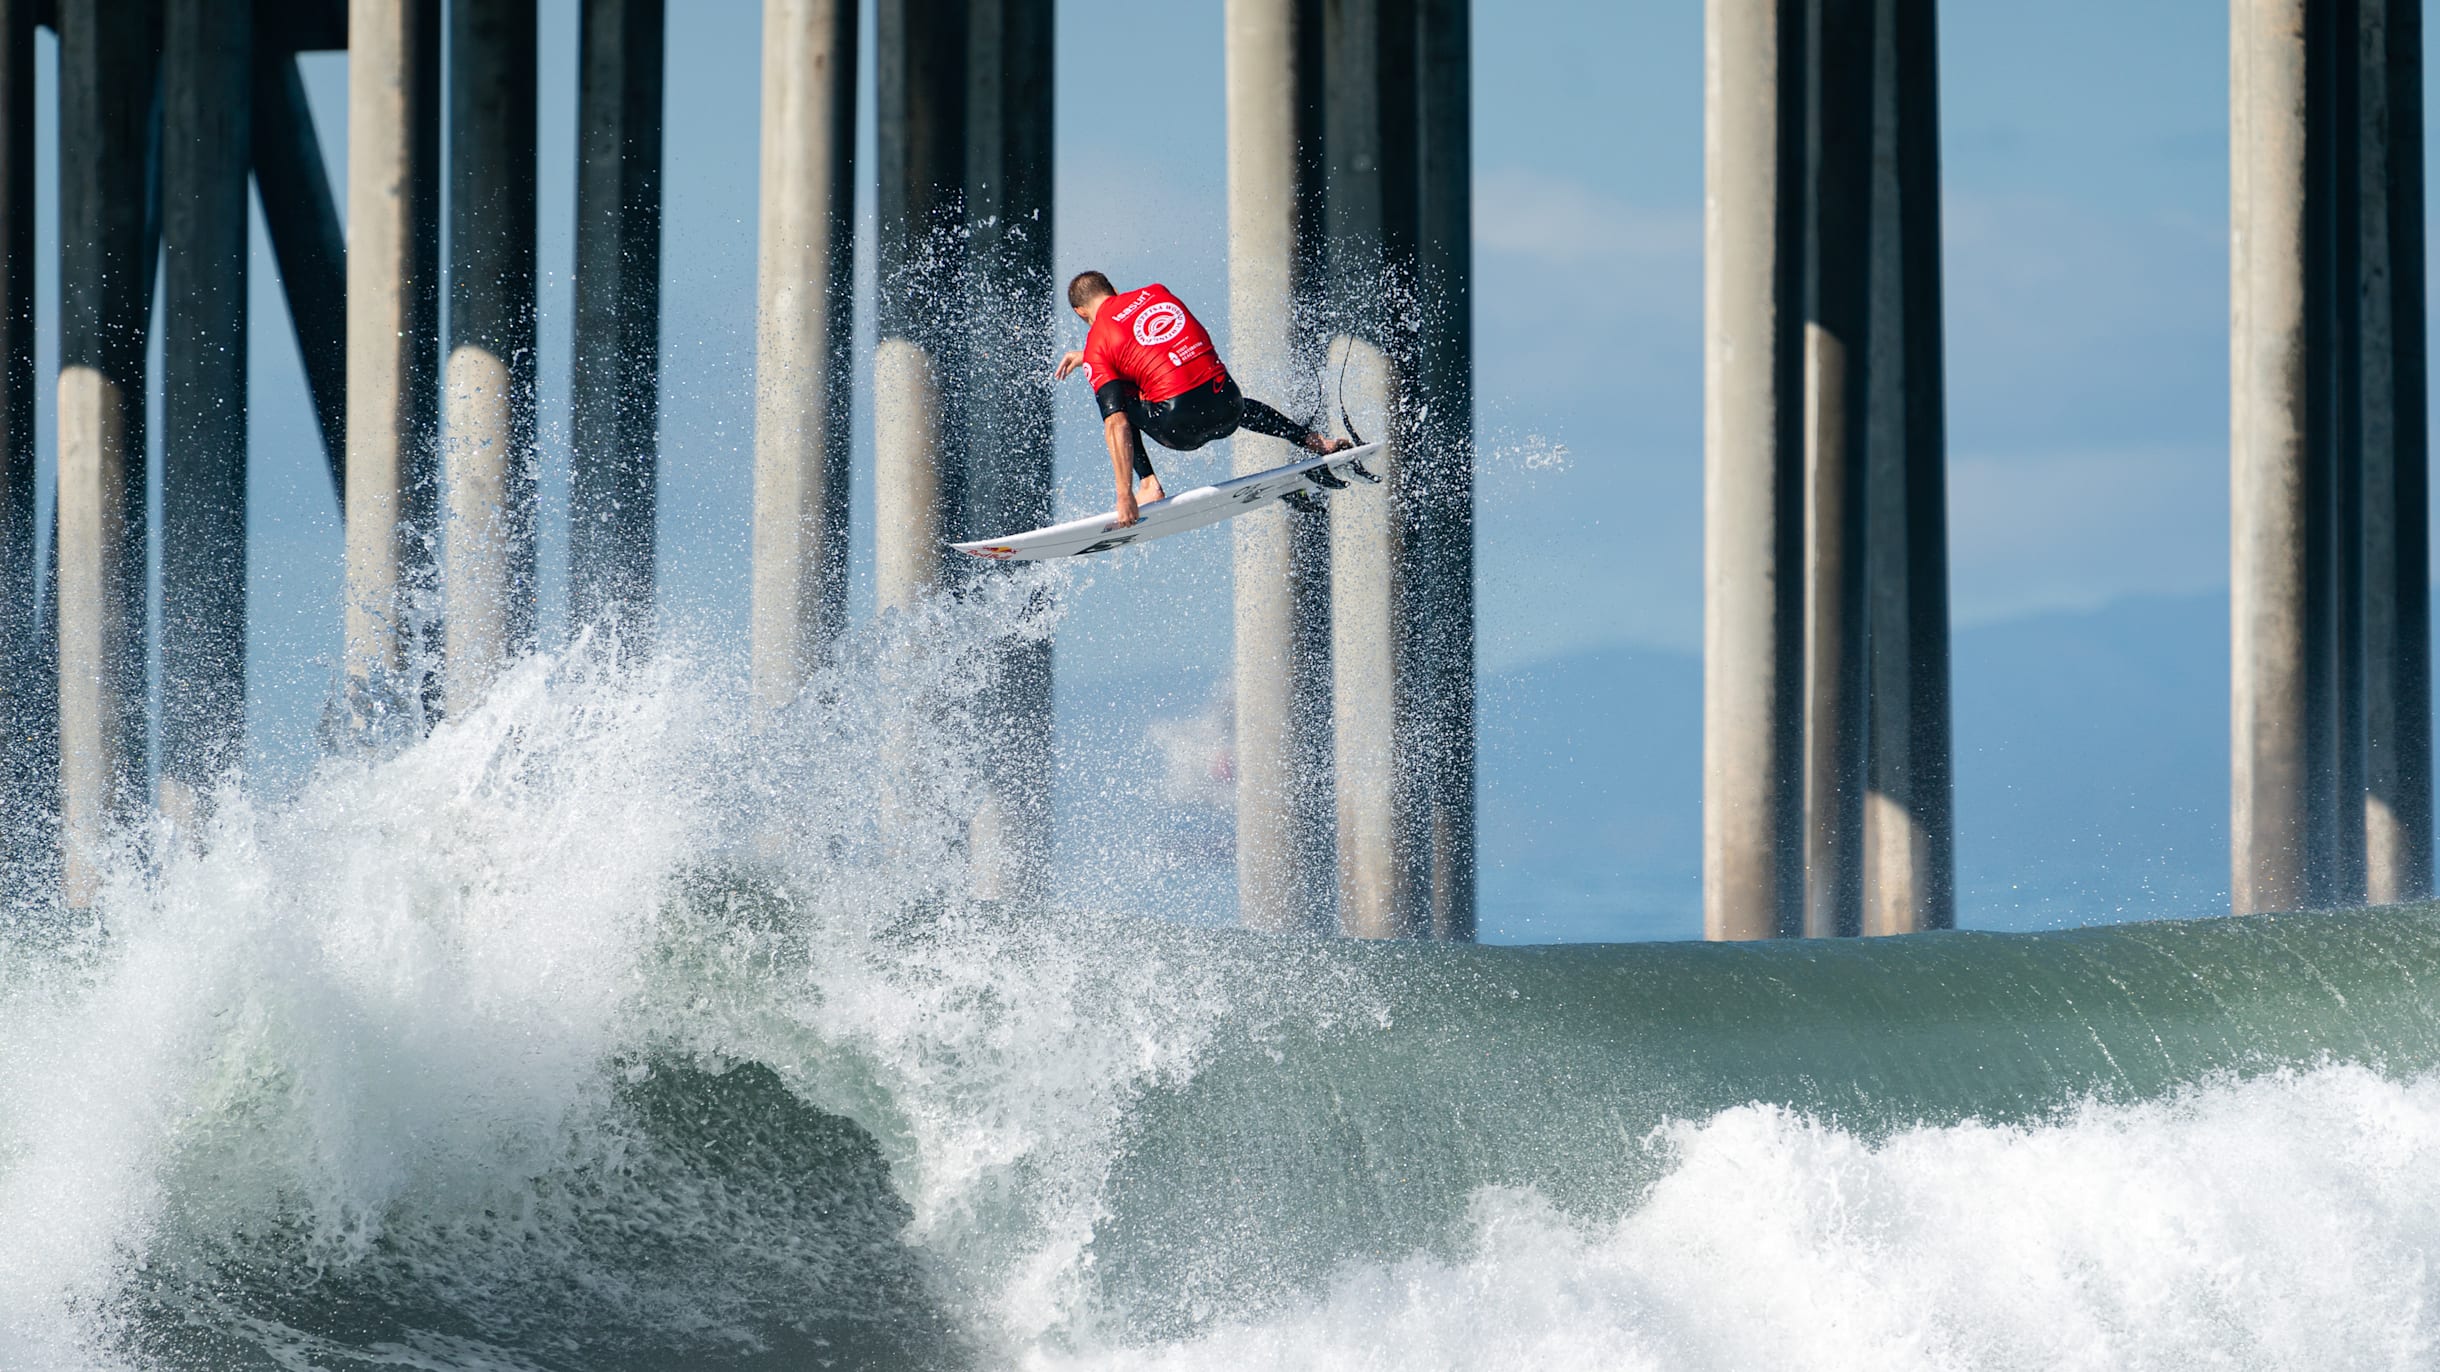 Vans US Open of Surfing: Here are a few standout surfers to watch